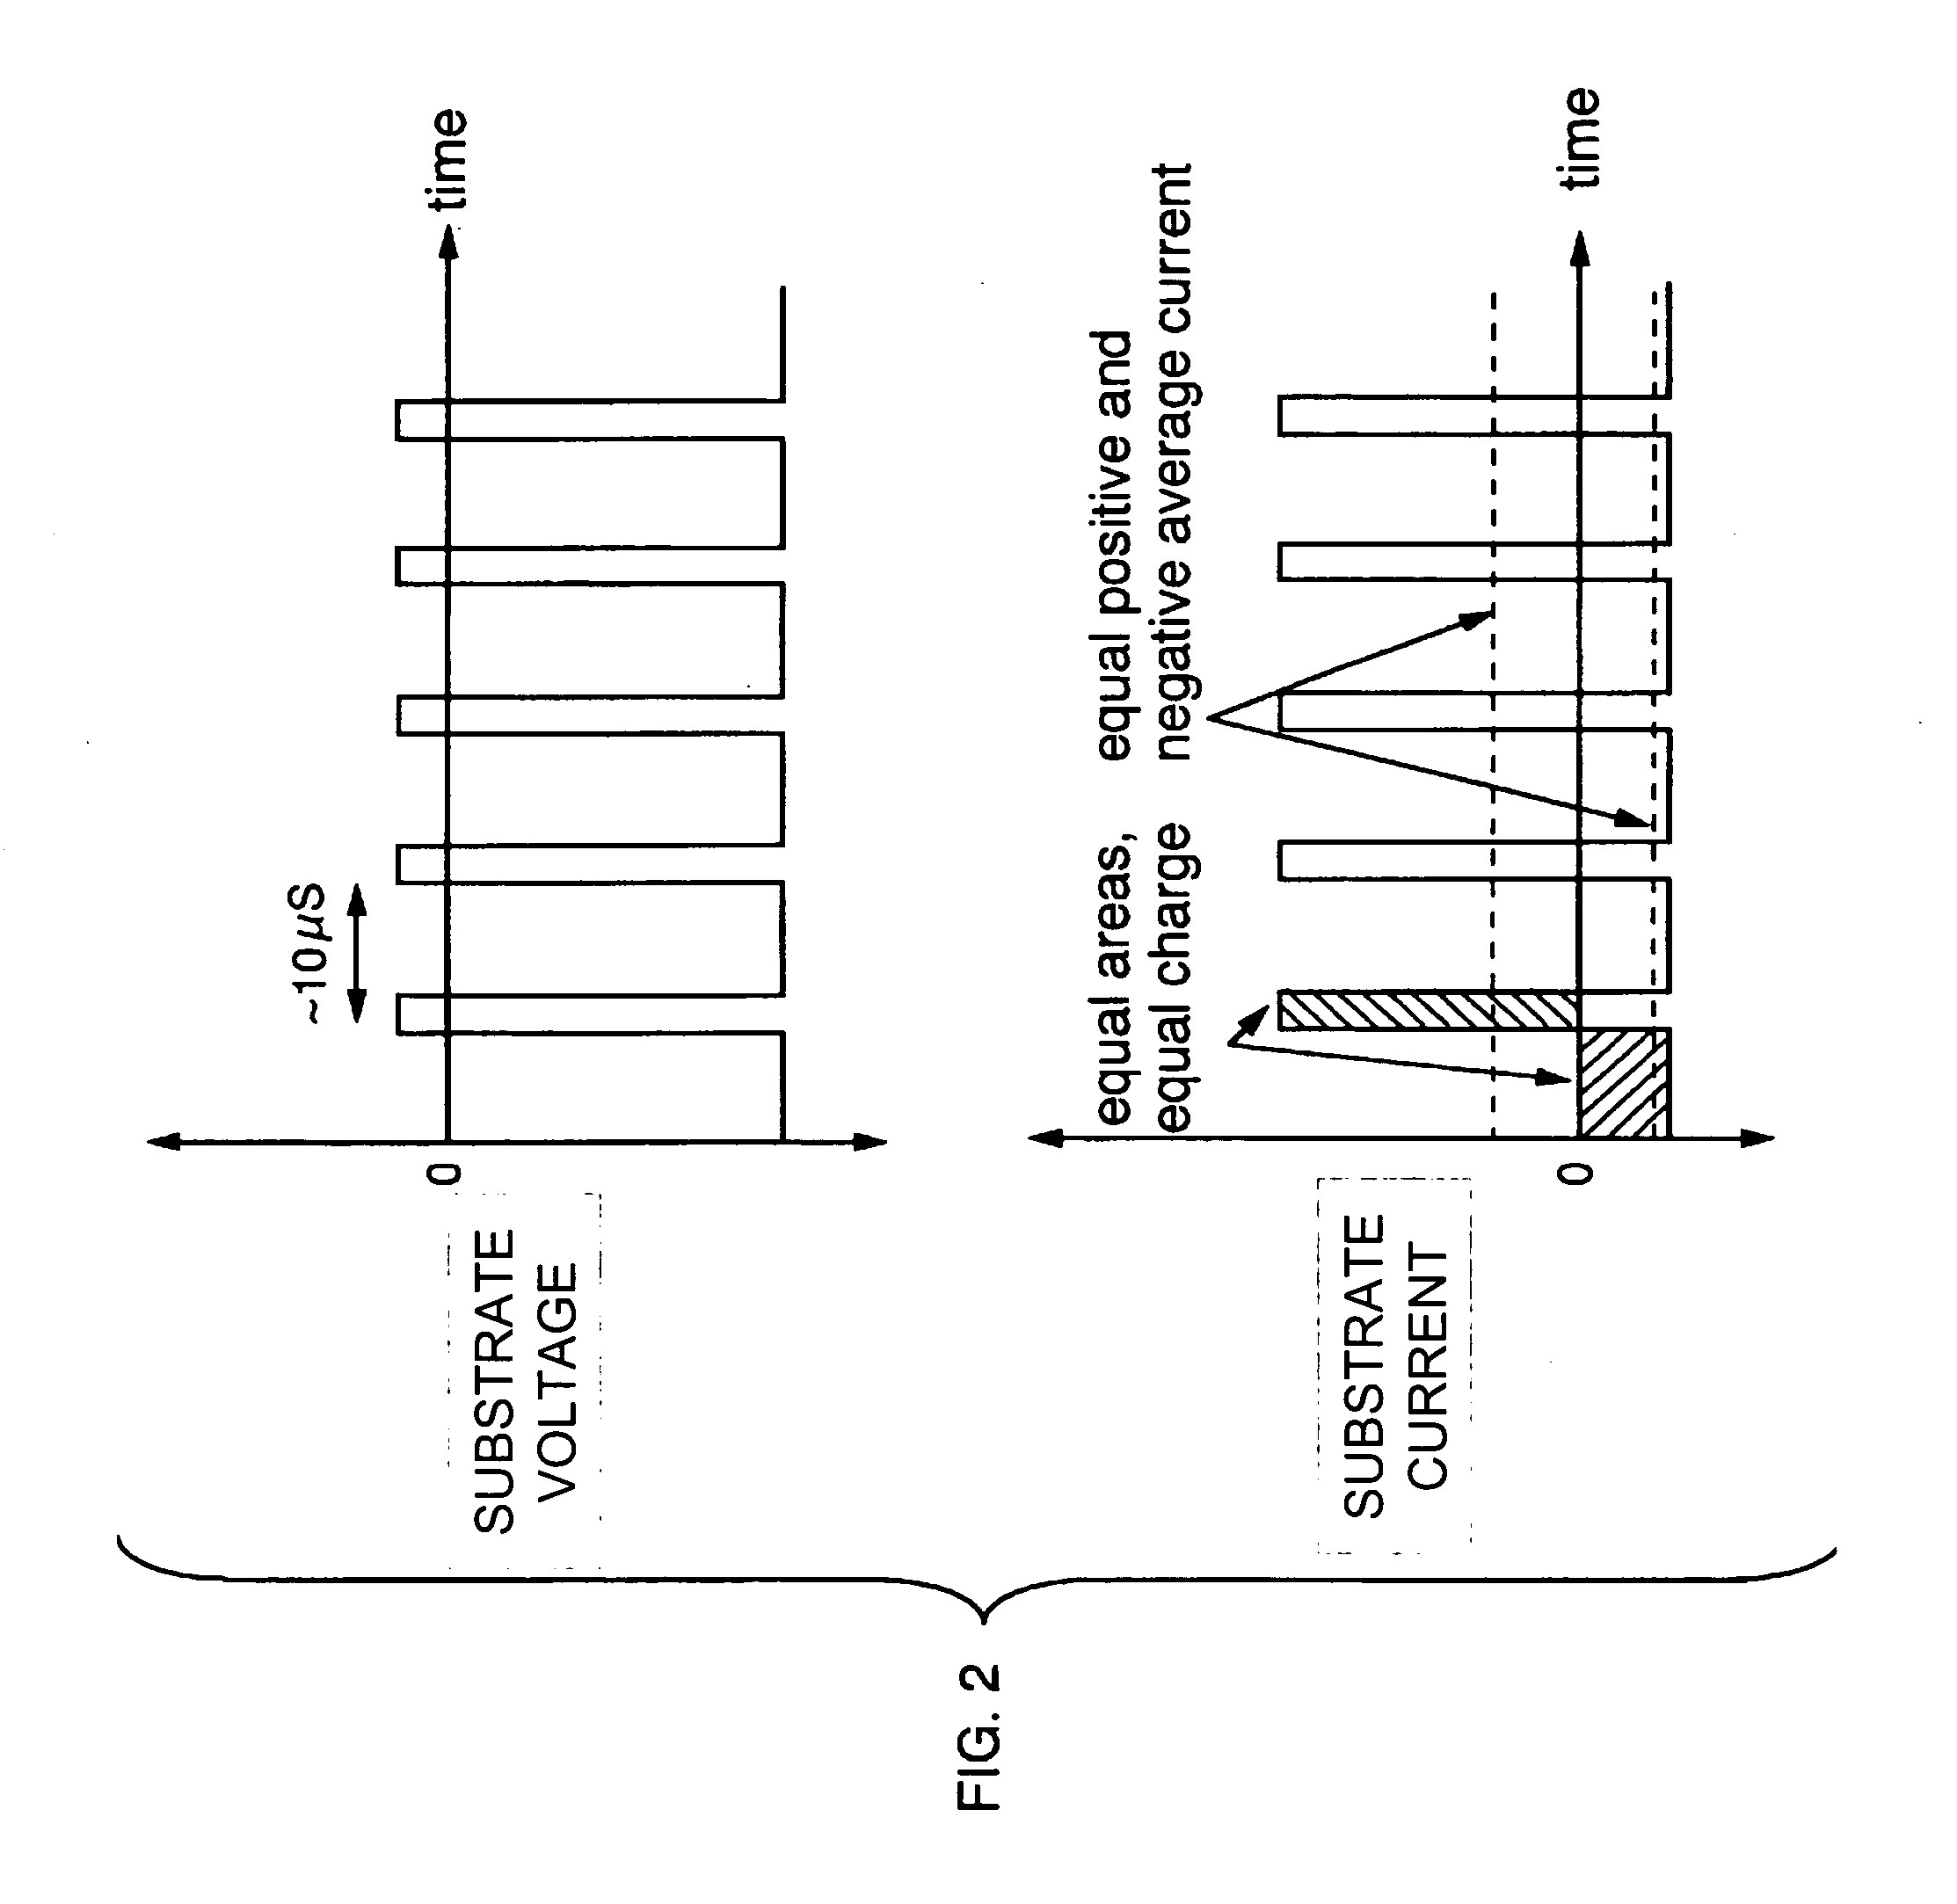 System and method for performing sputter etching using independent ion and electron sources and a substrate biased with an a-symmetric bi-polar DC pulse signal